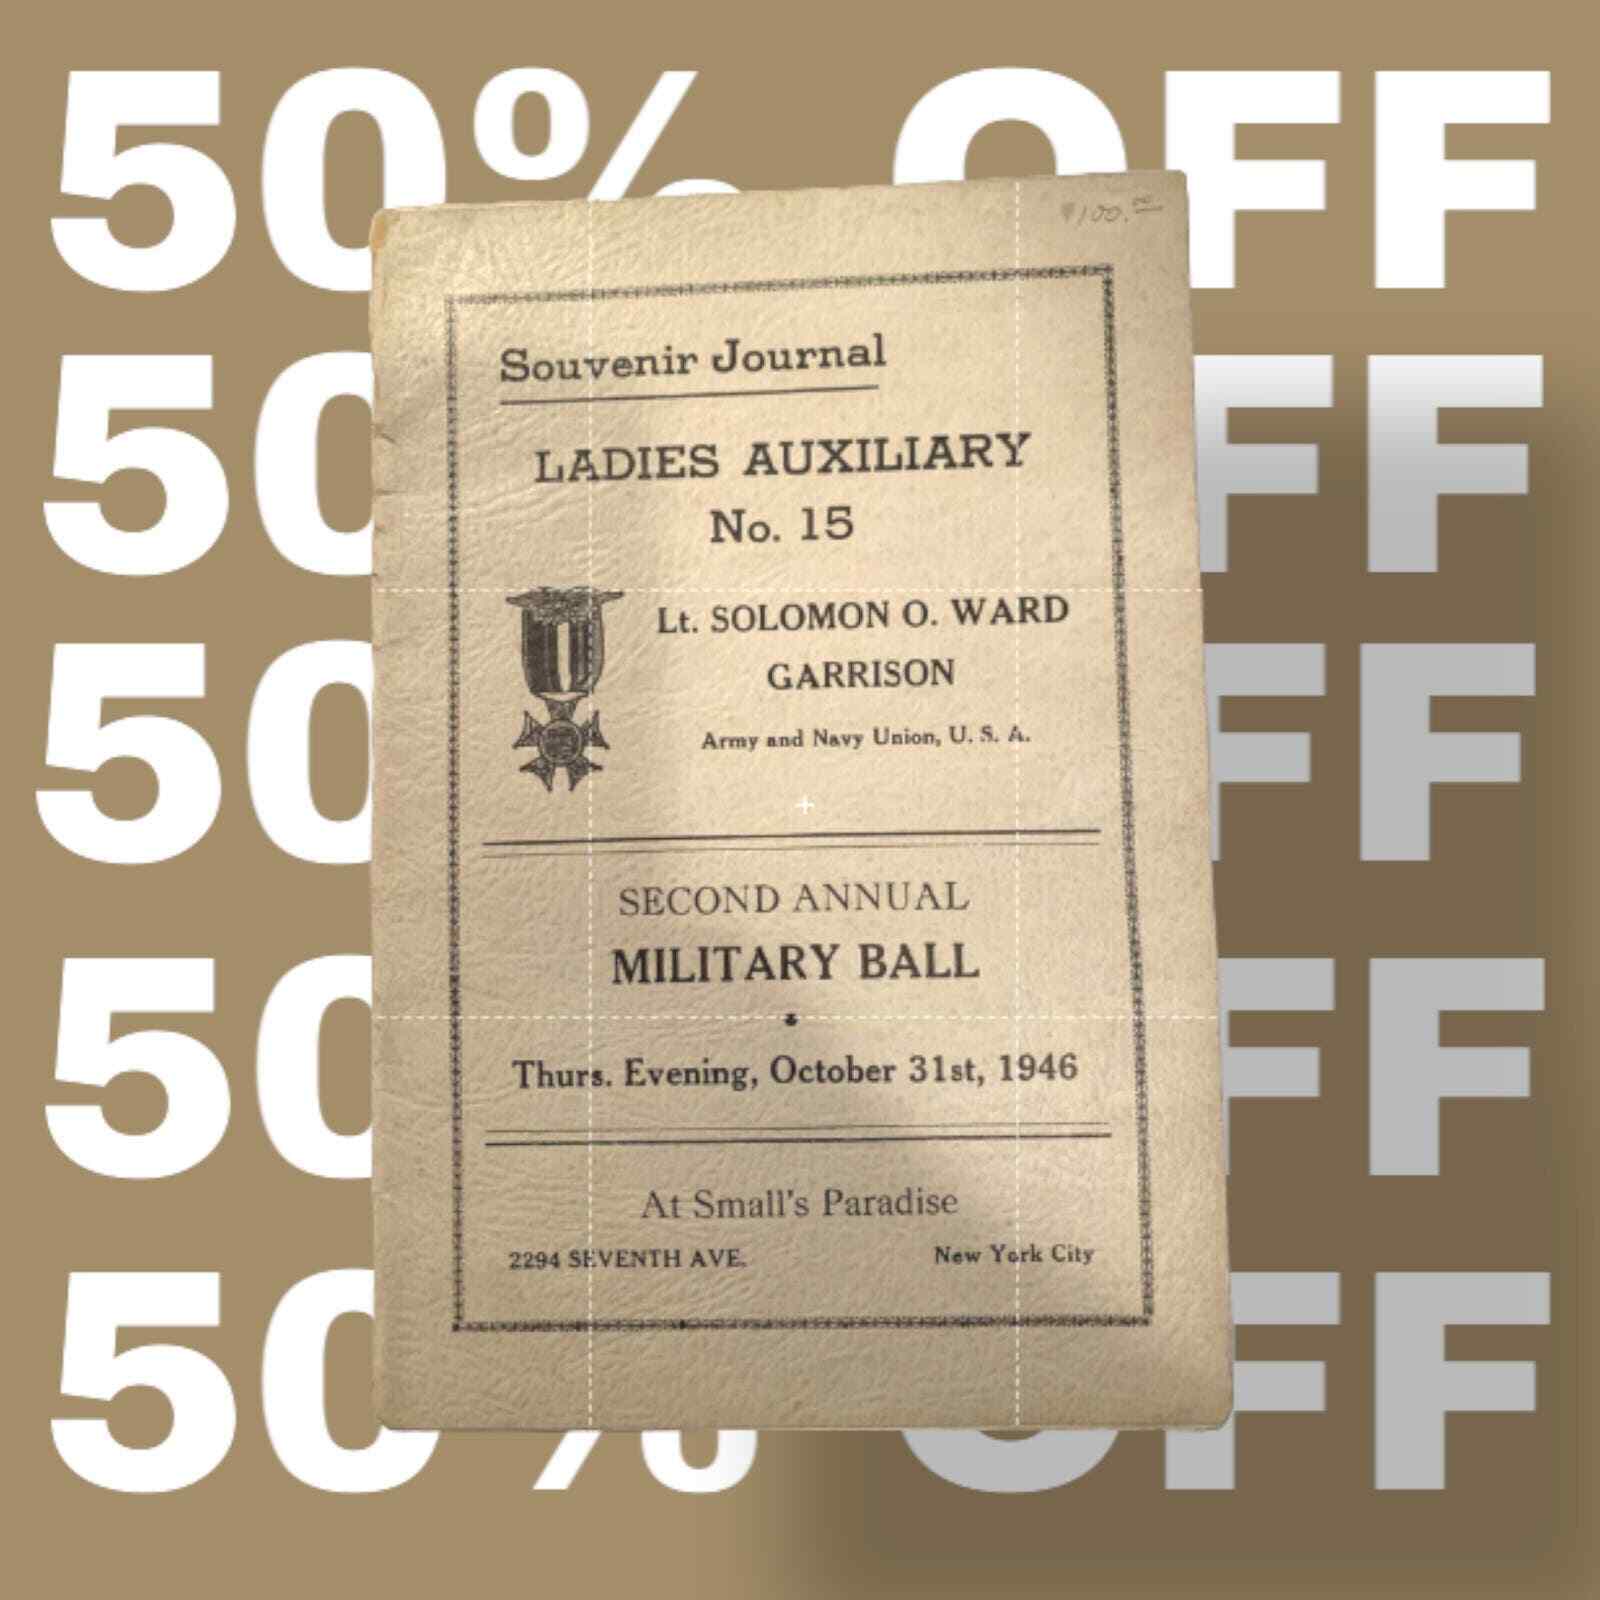 LADIES AUXILIARY No.15 SECOND ANNUAL MILITARY BALL 1946 Souvenir Journal 